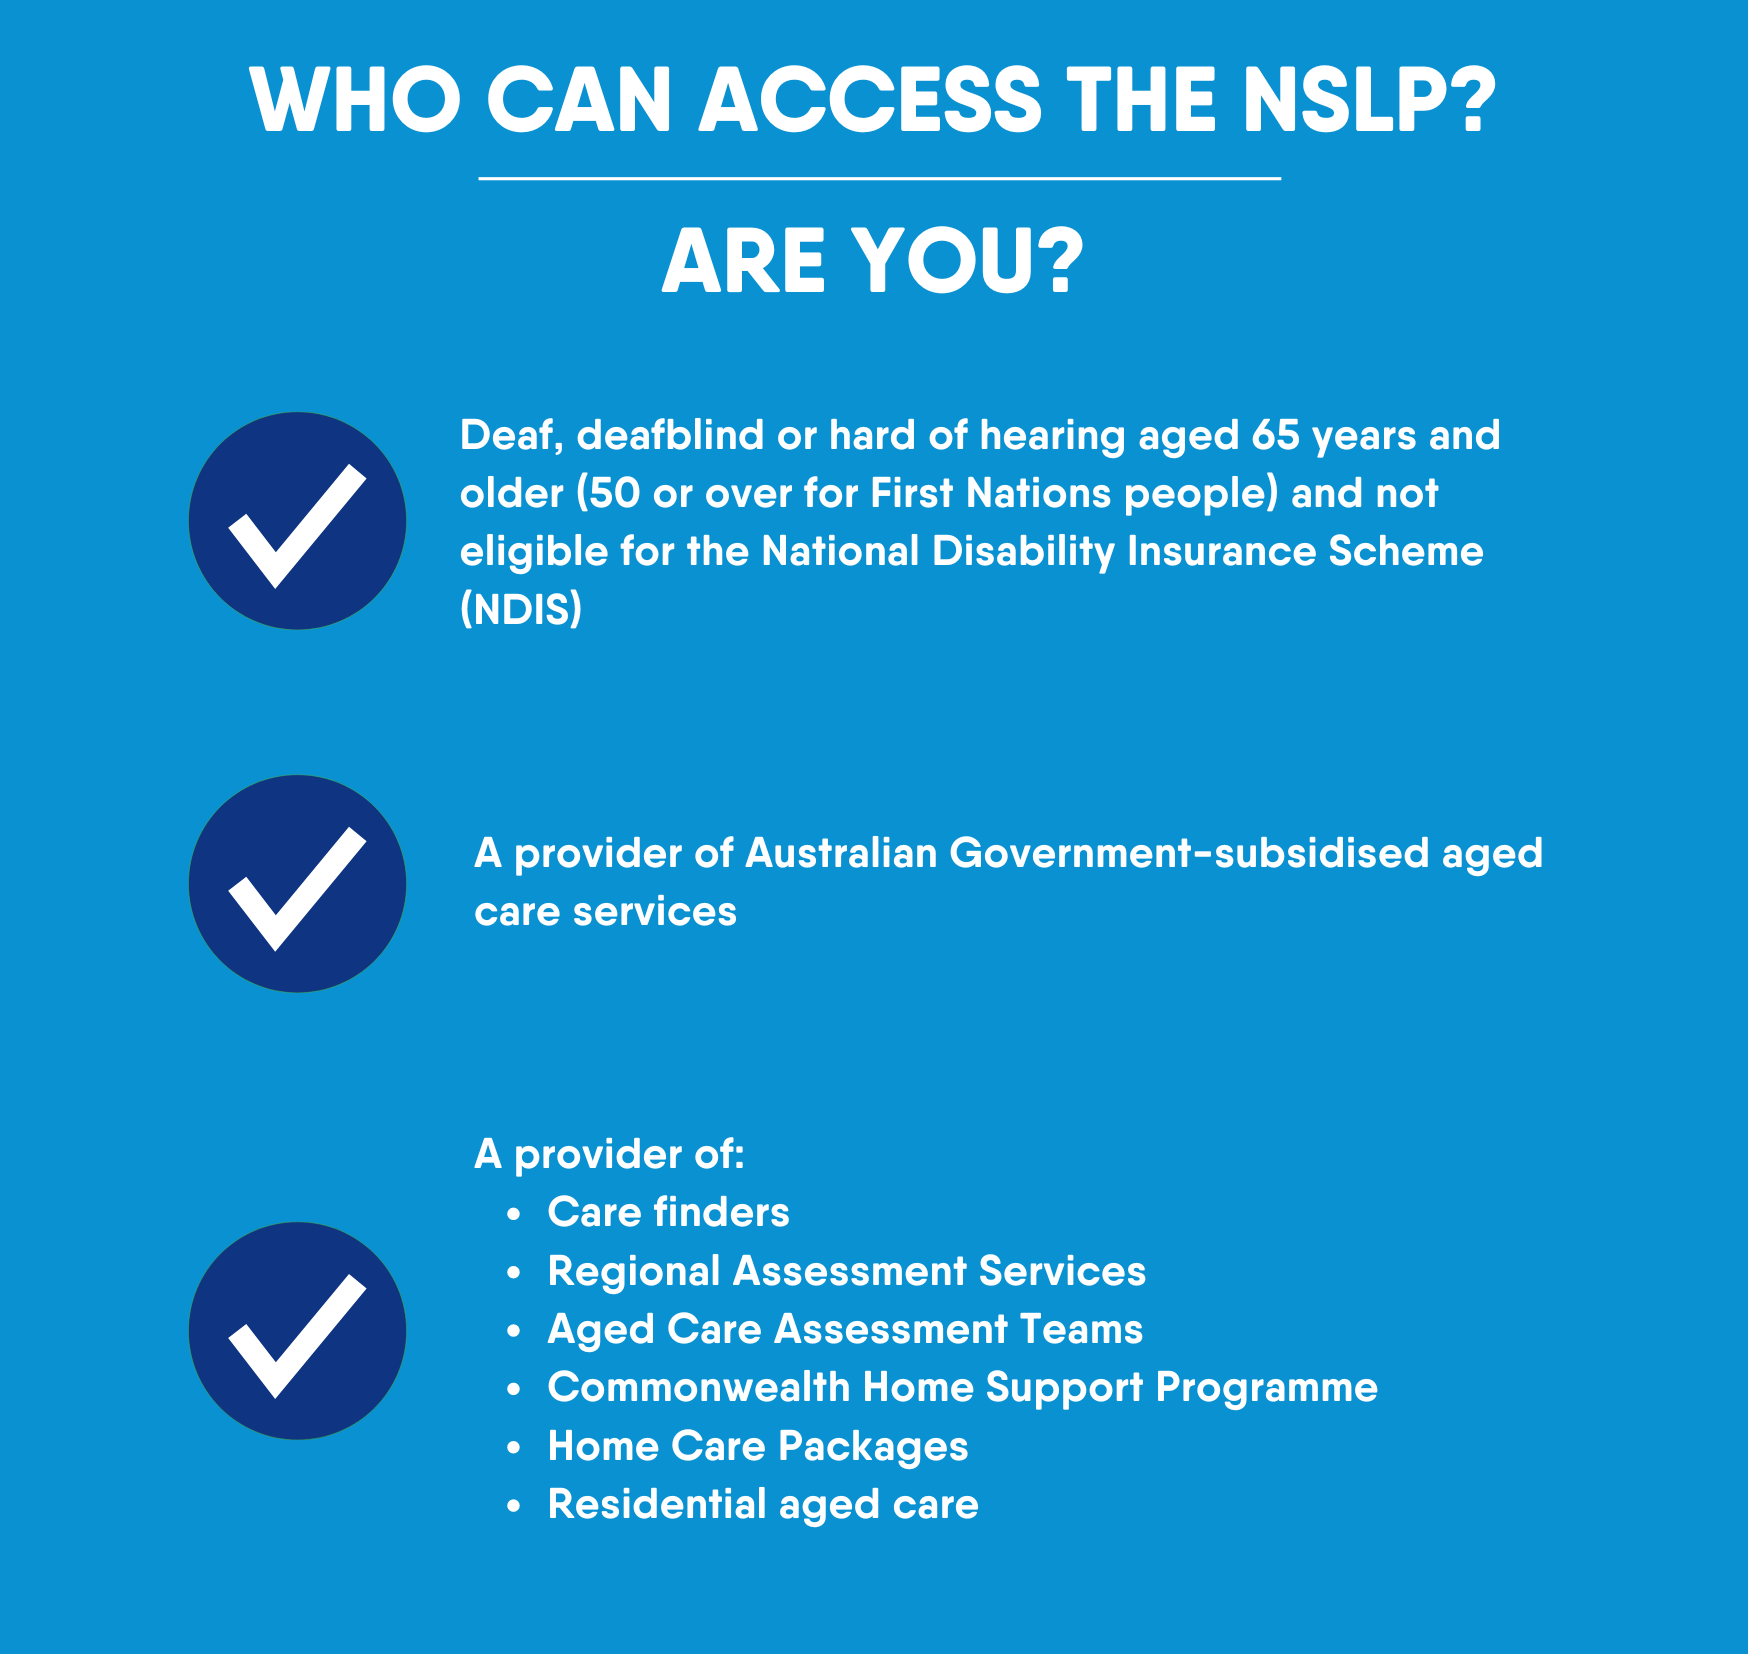 WHO CAN ACCESS THE NSLP